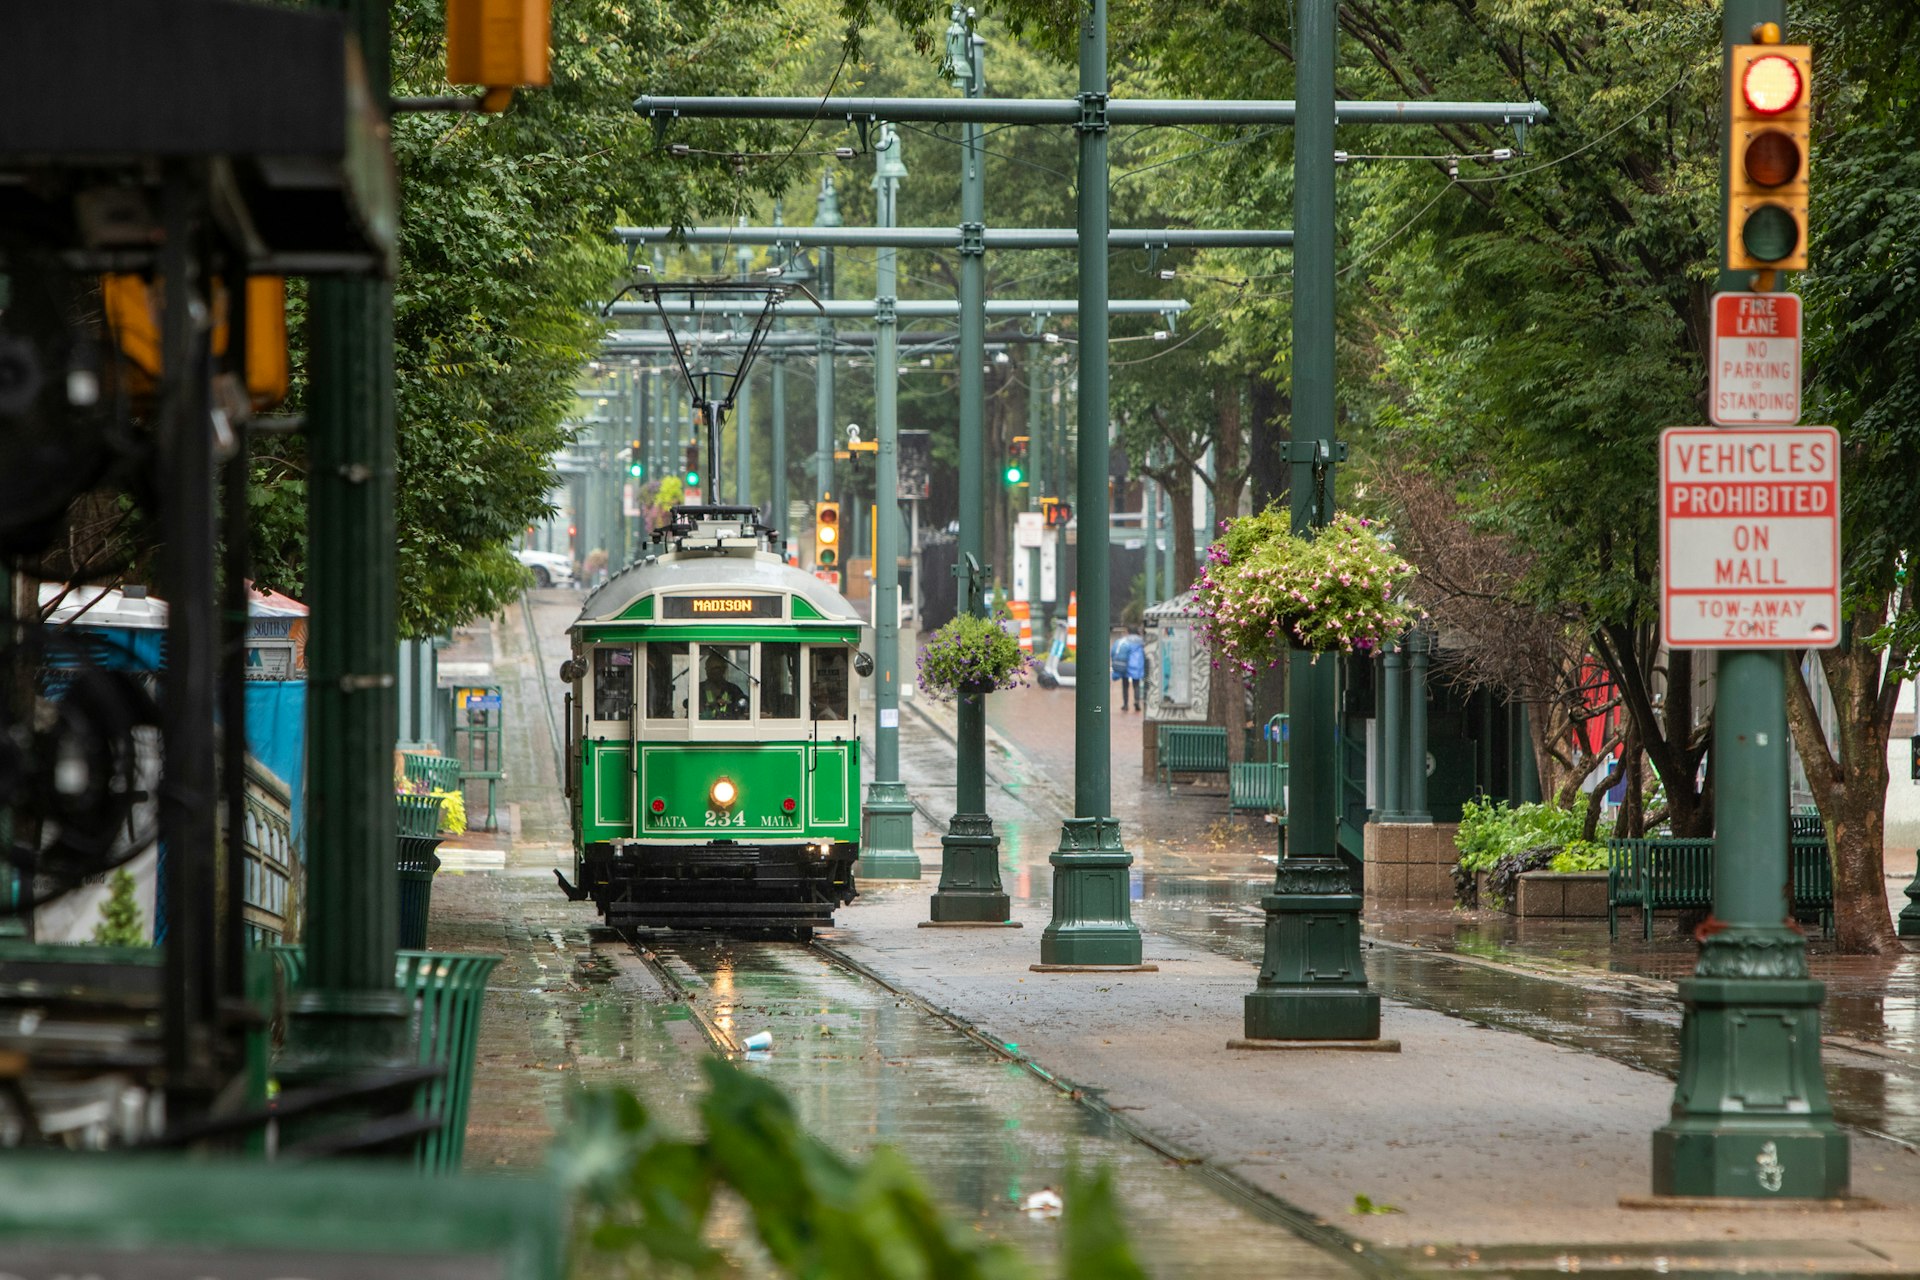 A green trolley on the street in Memphis, Tennessee